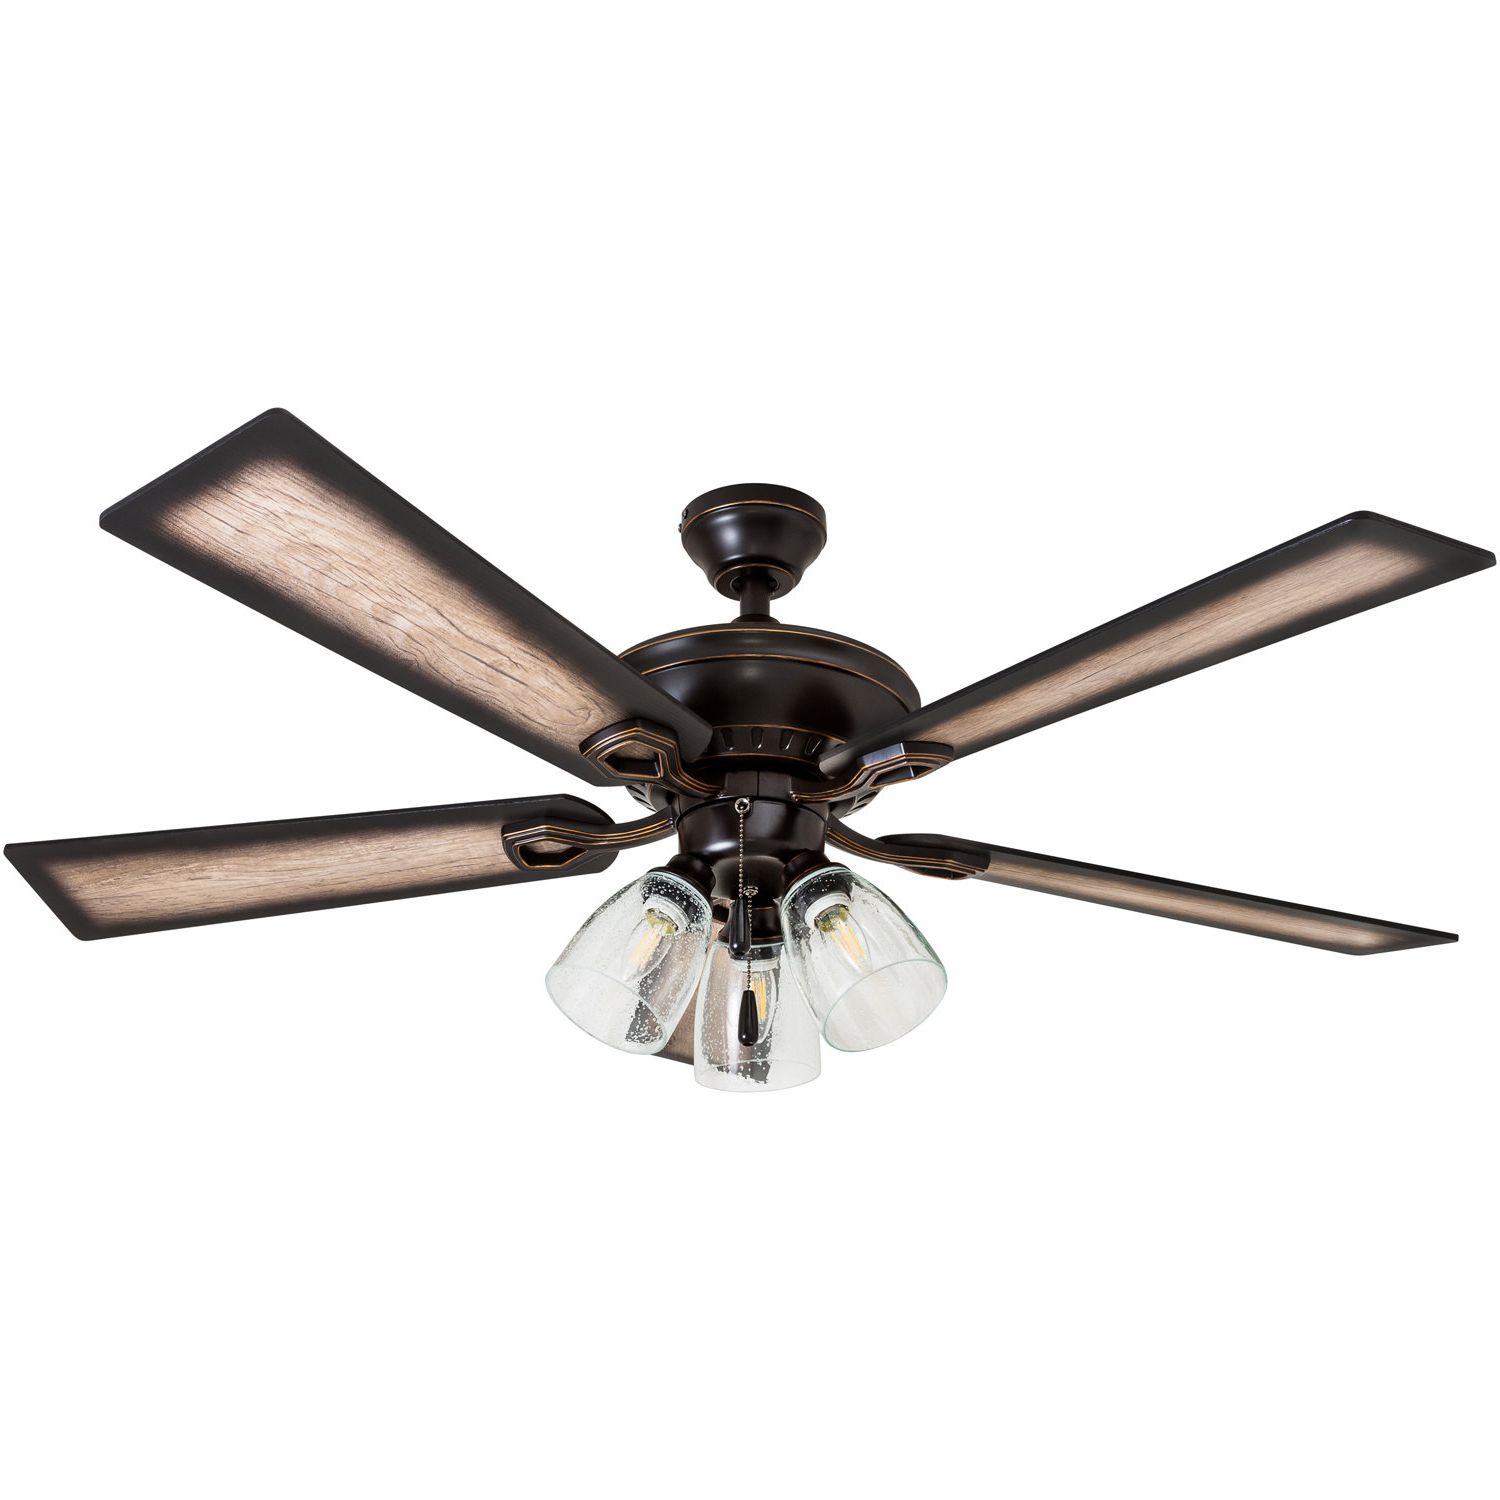 Fashionable Windemere 5 Blade Ceiling Fans With Remote Inside 52" O'hanlon 5 Blade Led Ceiling Fan, Light Kit Included (View 7 of 20)